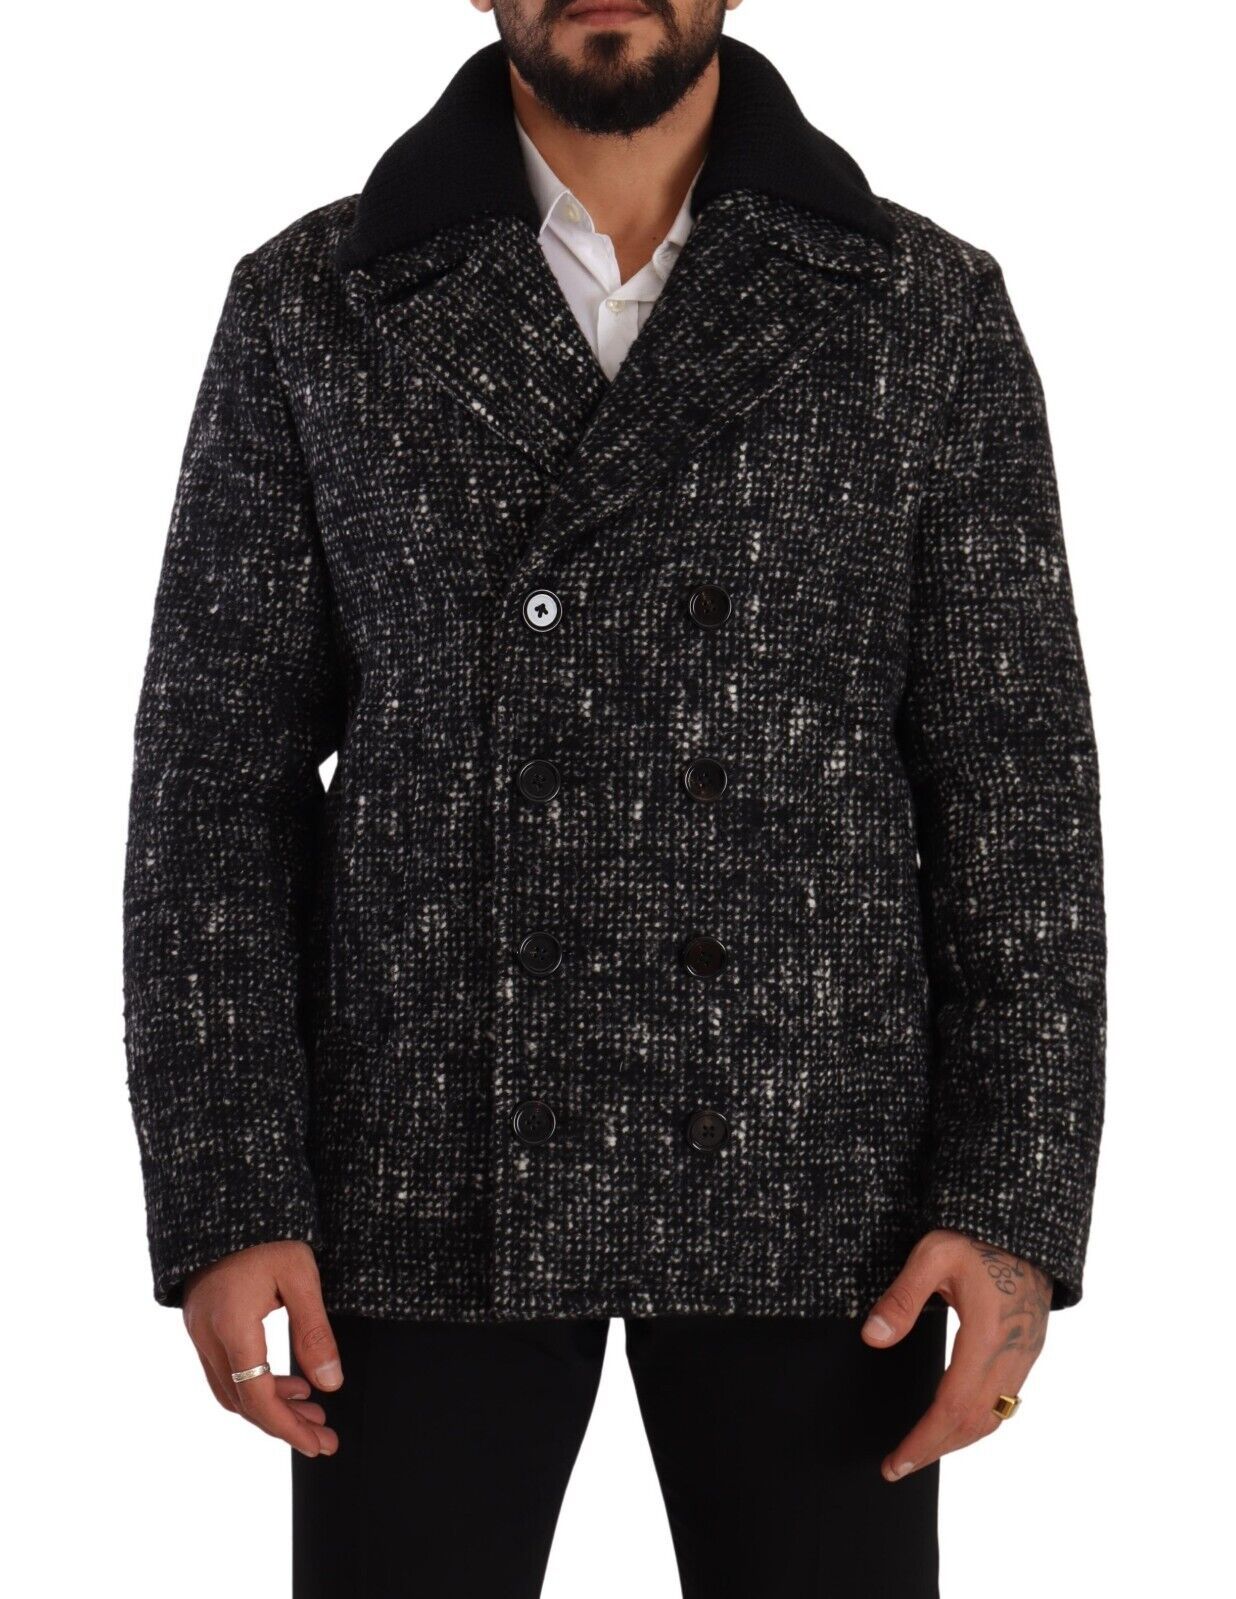 Black and Gray Dolce & Gabbana Black Wool Double Breasted Coat Men Jacket